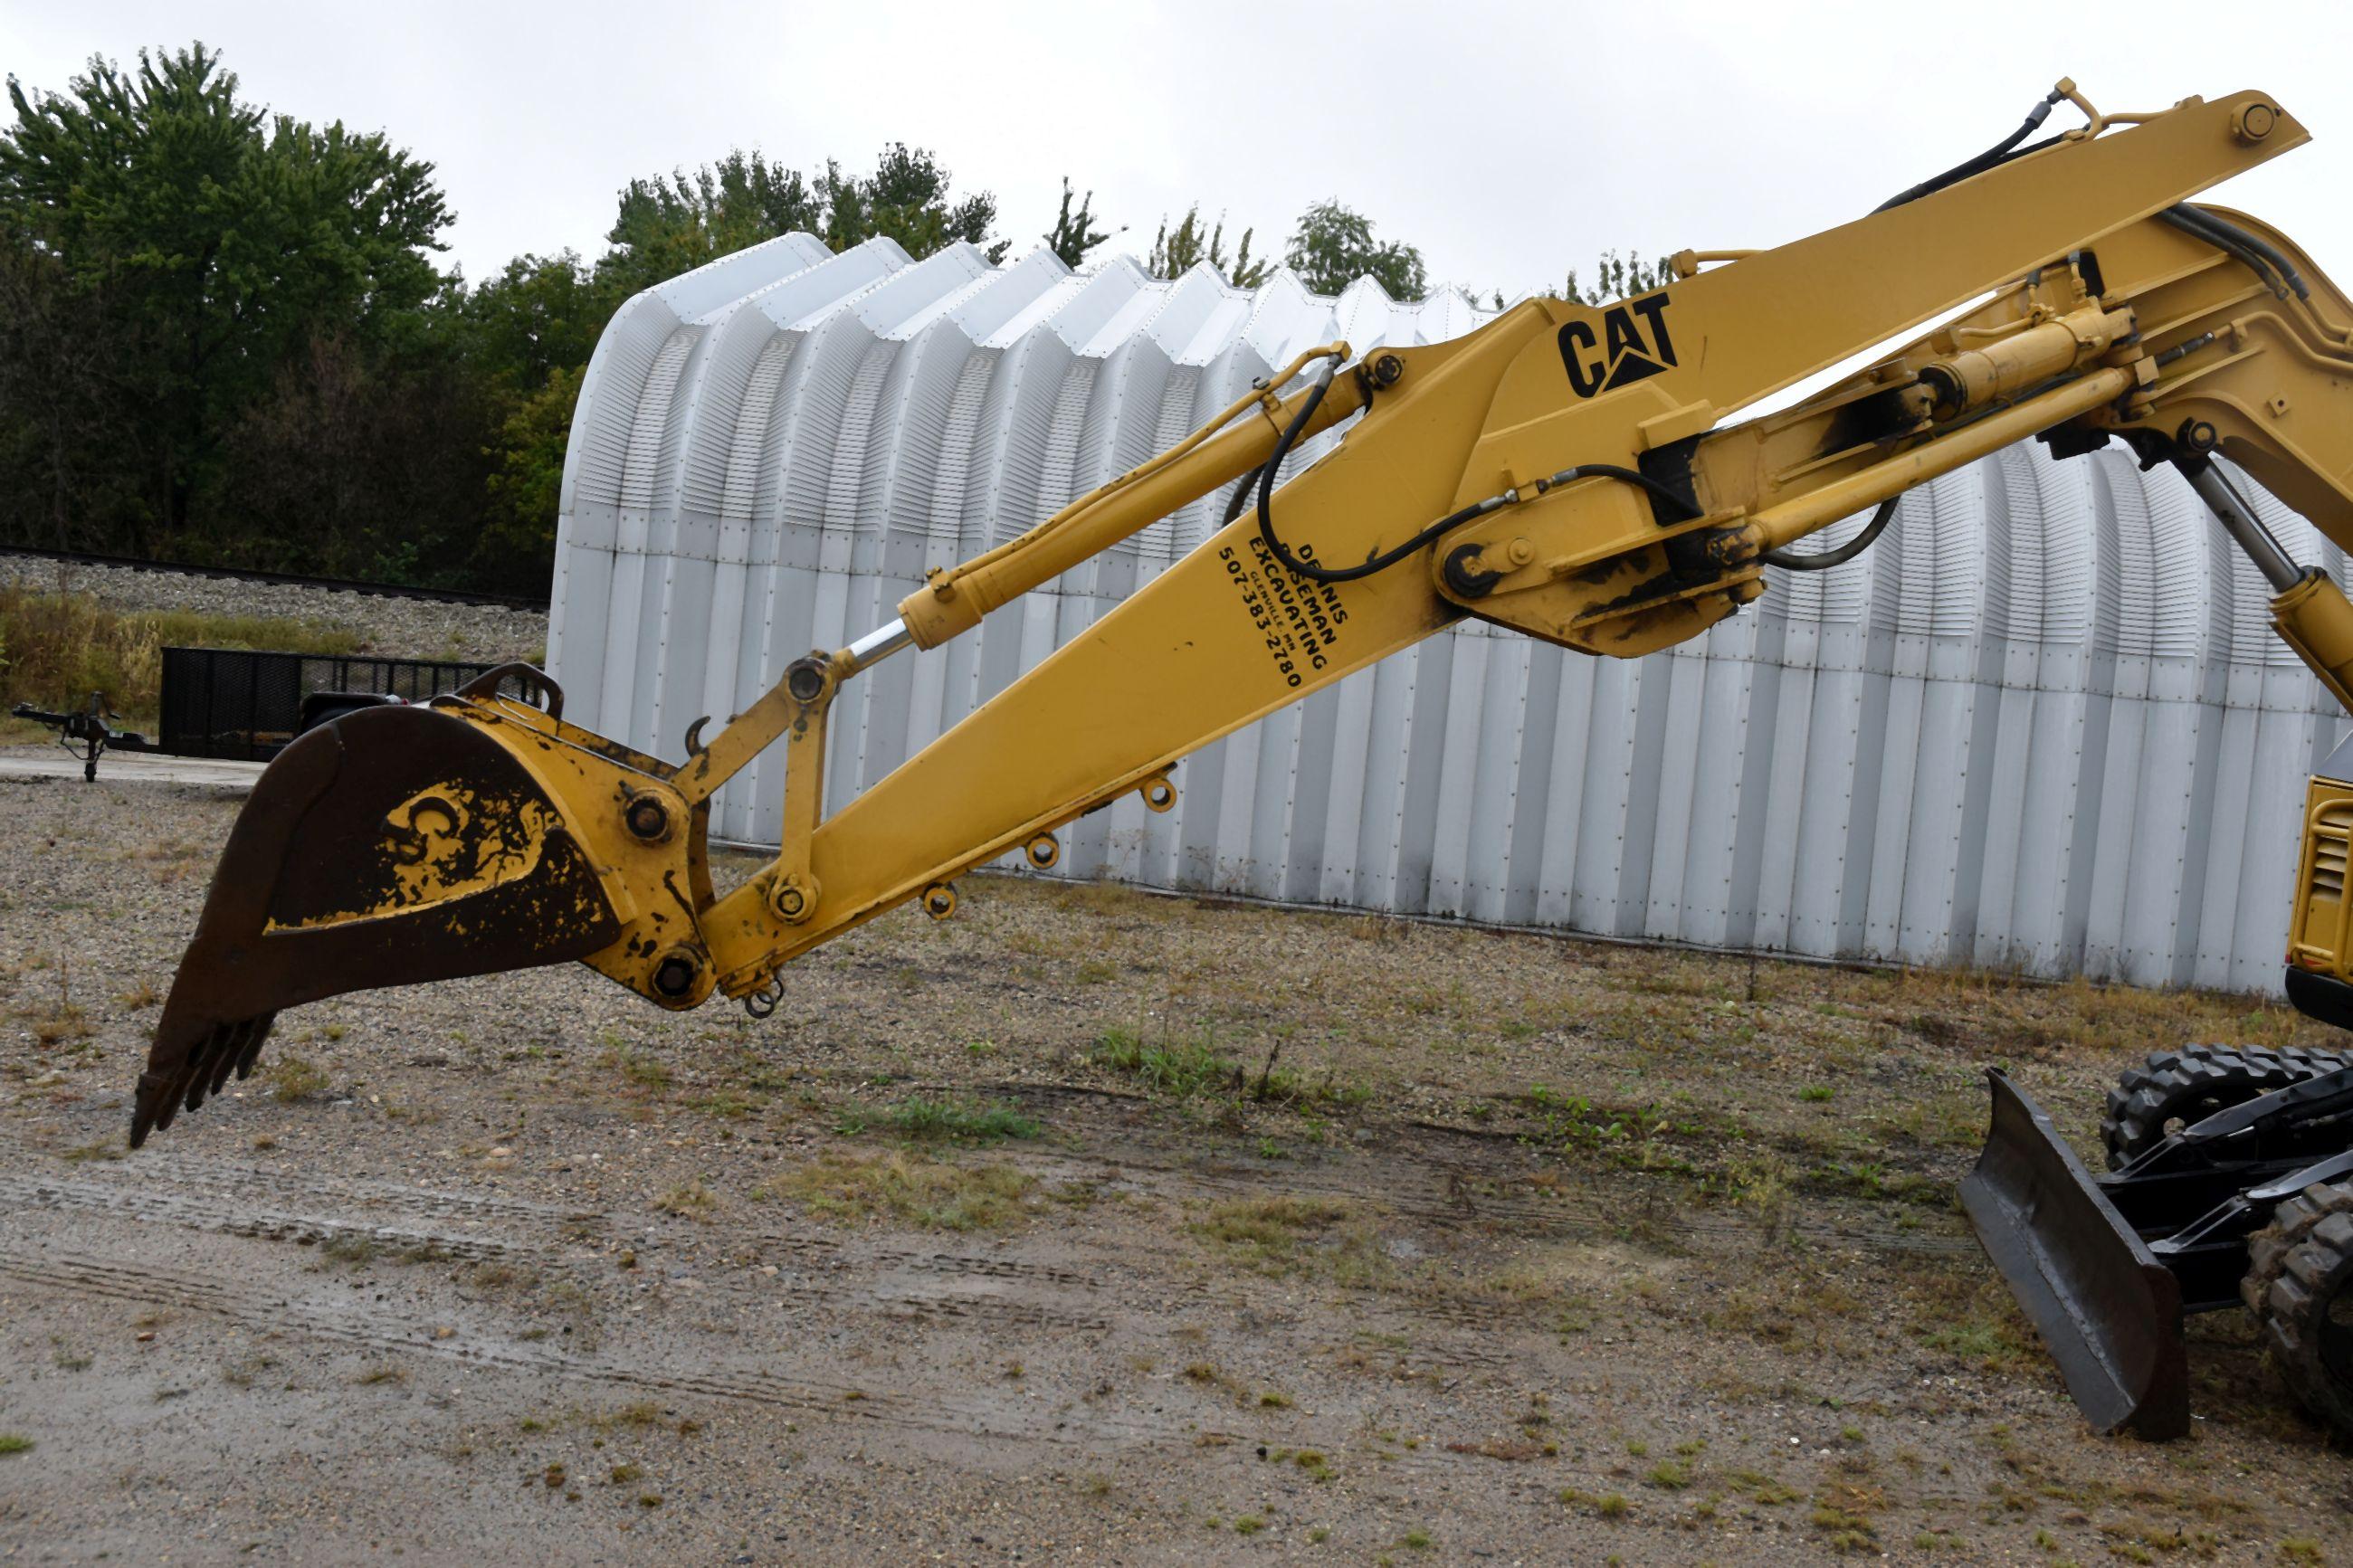 Cat 307SSR Mini Excavator, 7299 Hours Showing, 18” Rubber Tracks,Tracks Ripped, 90” Push Blade, 22''